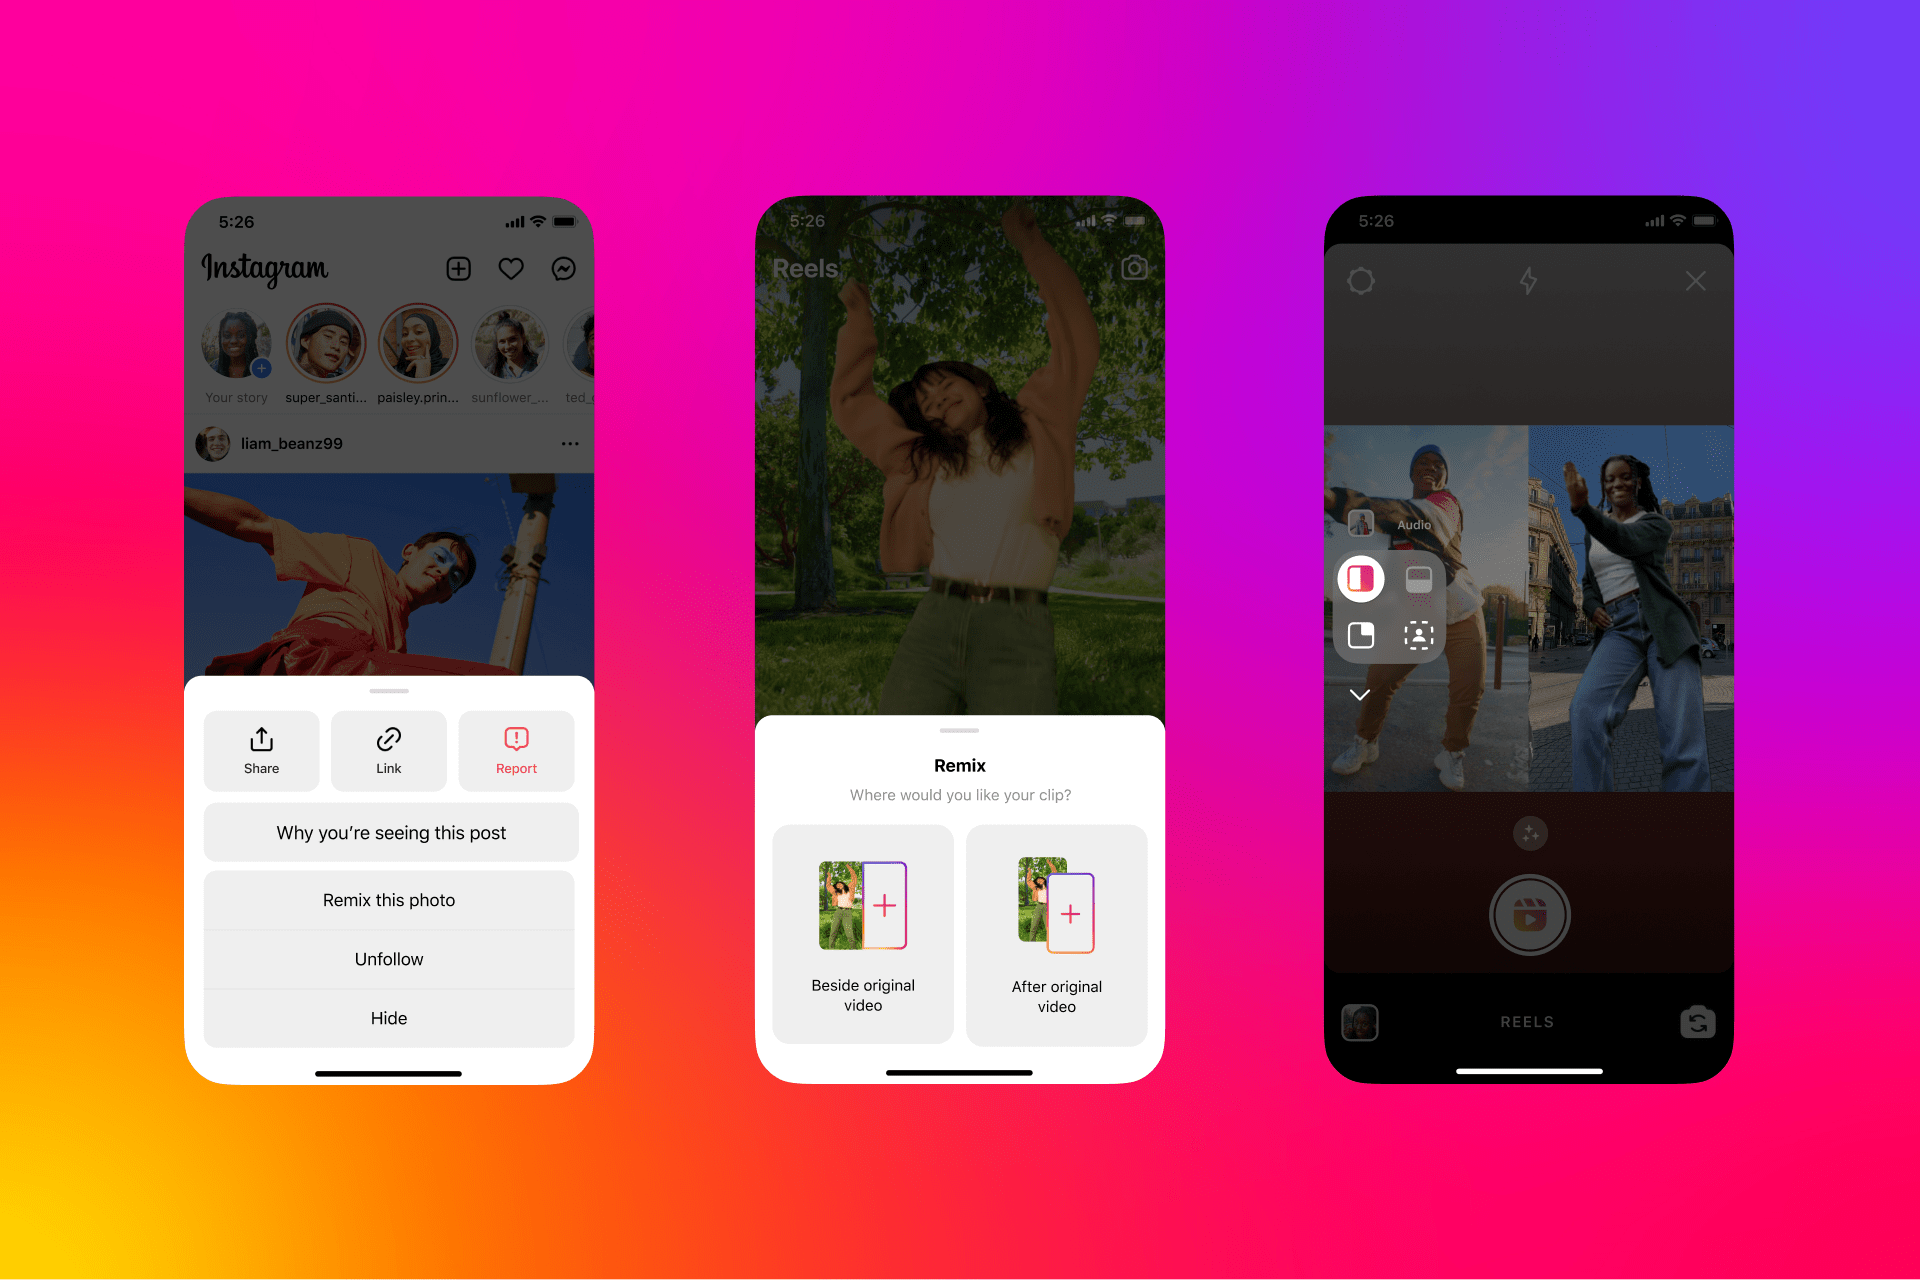 New Instagram Reels Features Include Templates, Boosts, & More